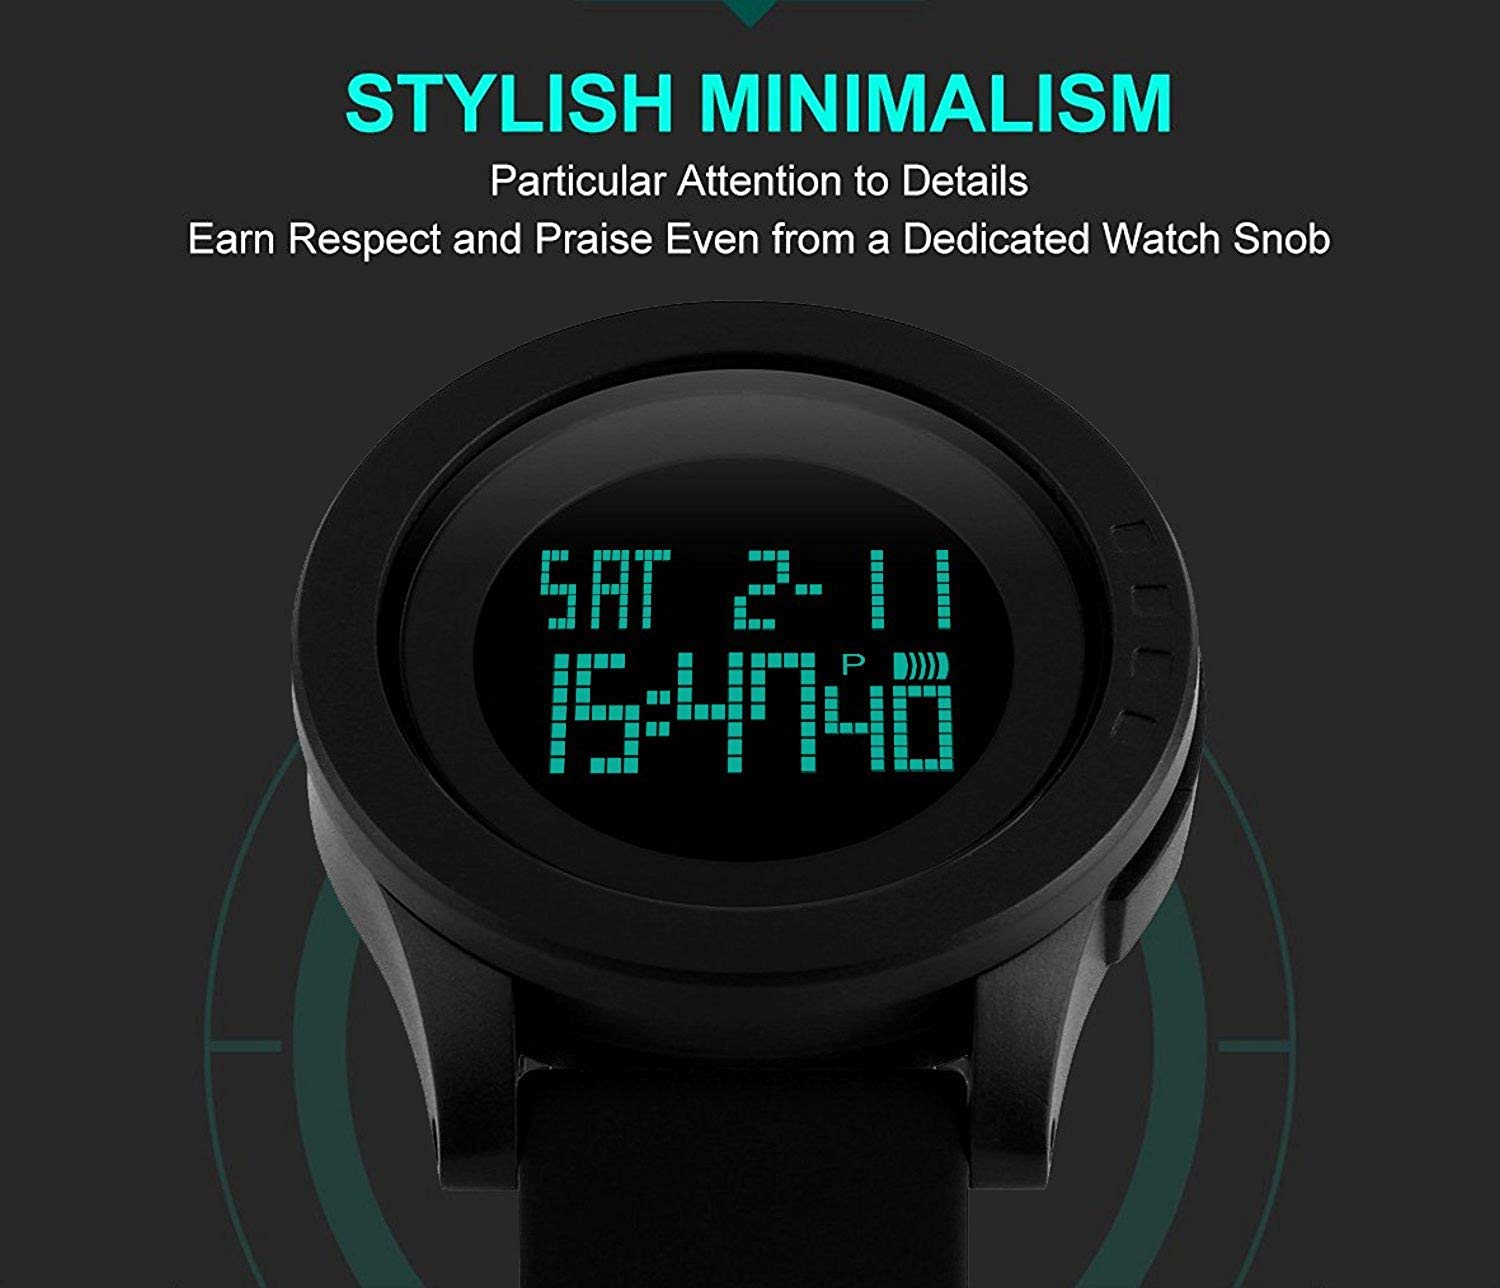 LYMFHCH Men's Digital Sports Watch LED Screen Large Face Electronics Military Watches for Men Waterproof Alarm Stopwatch Back Light Outdoor Army Watch